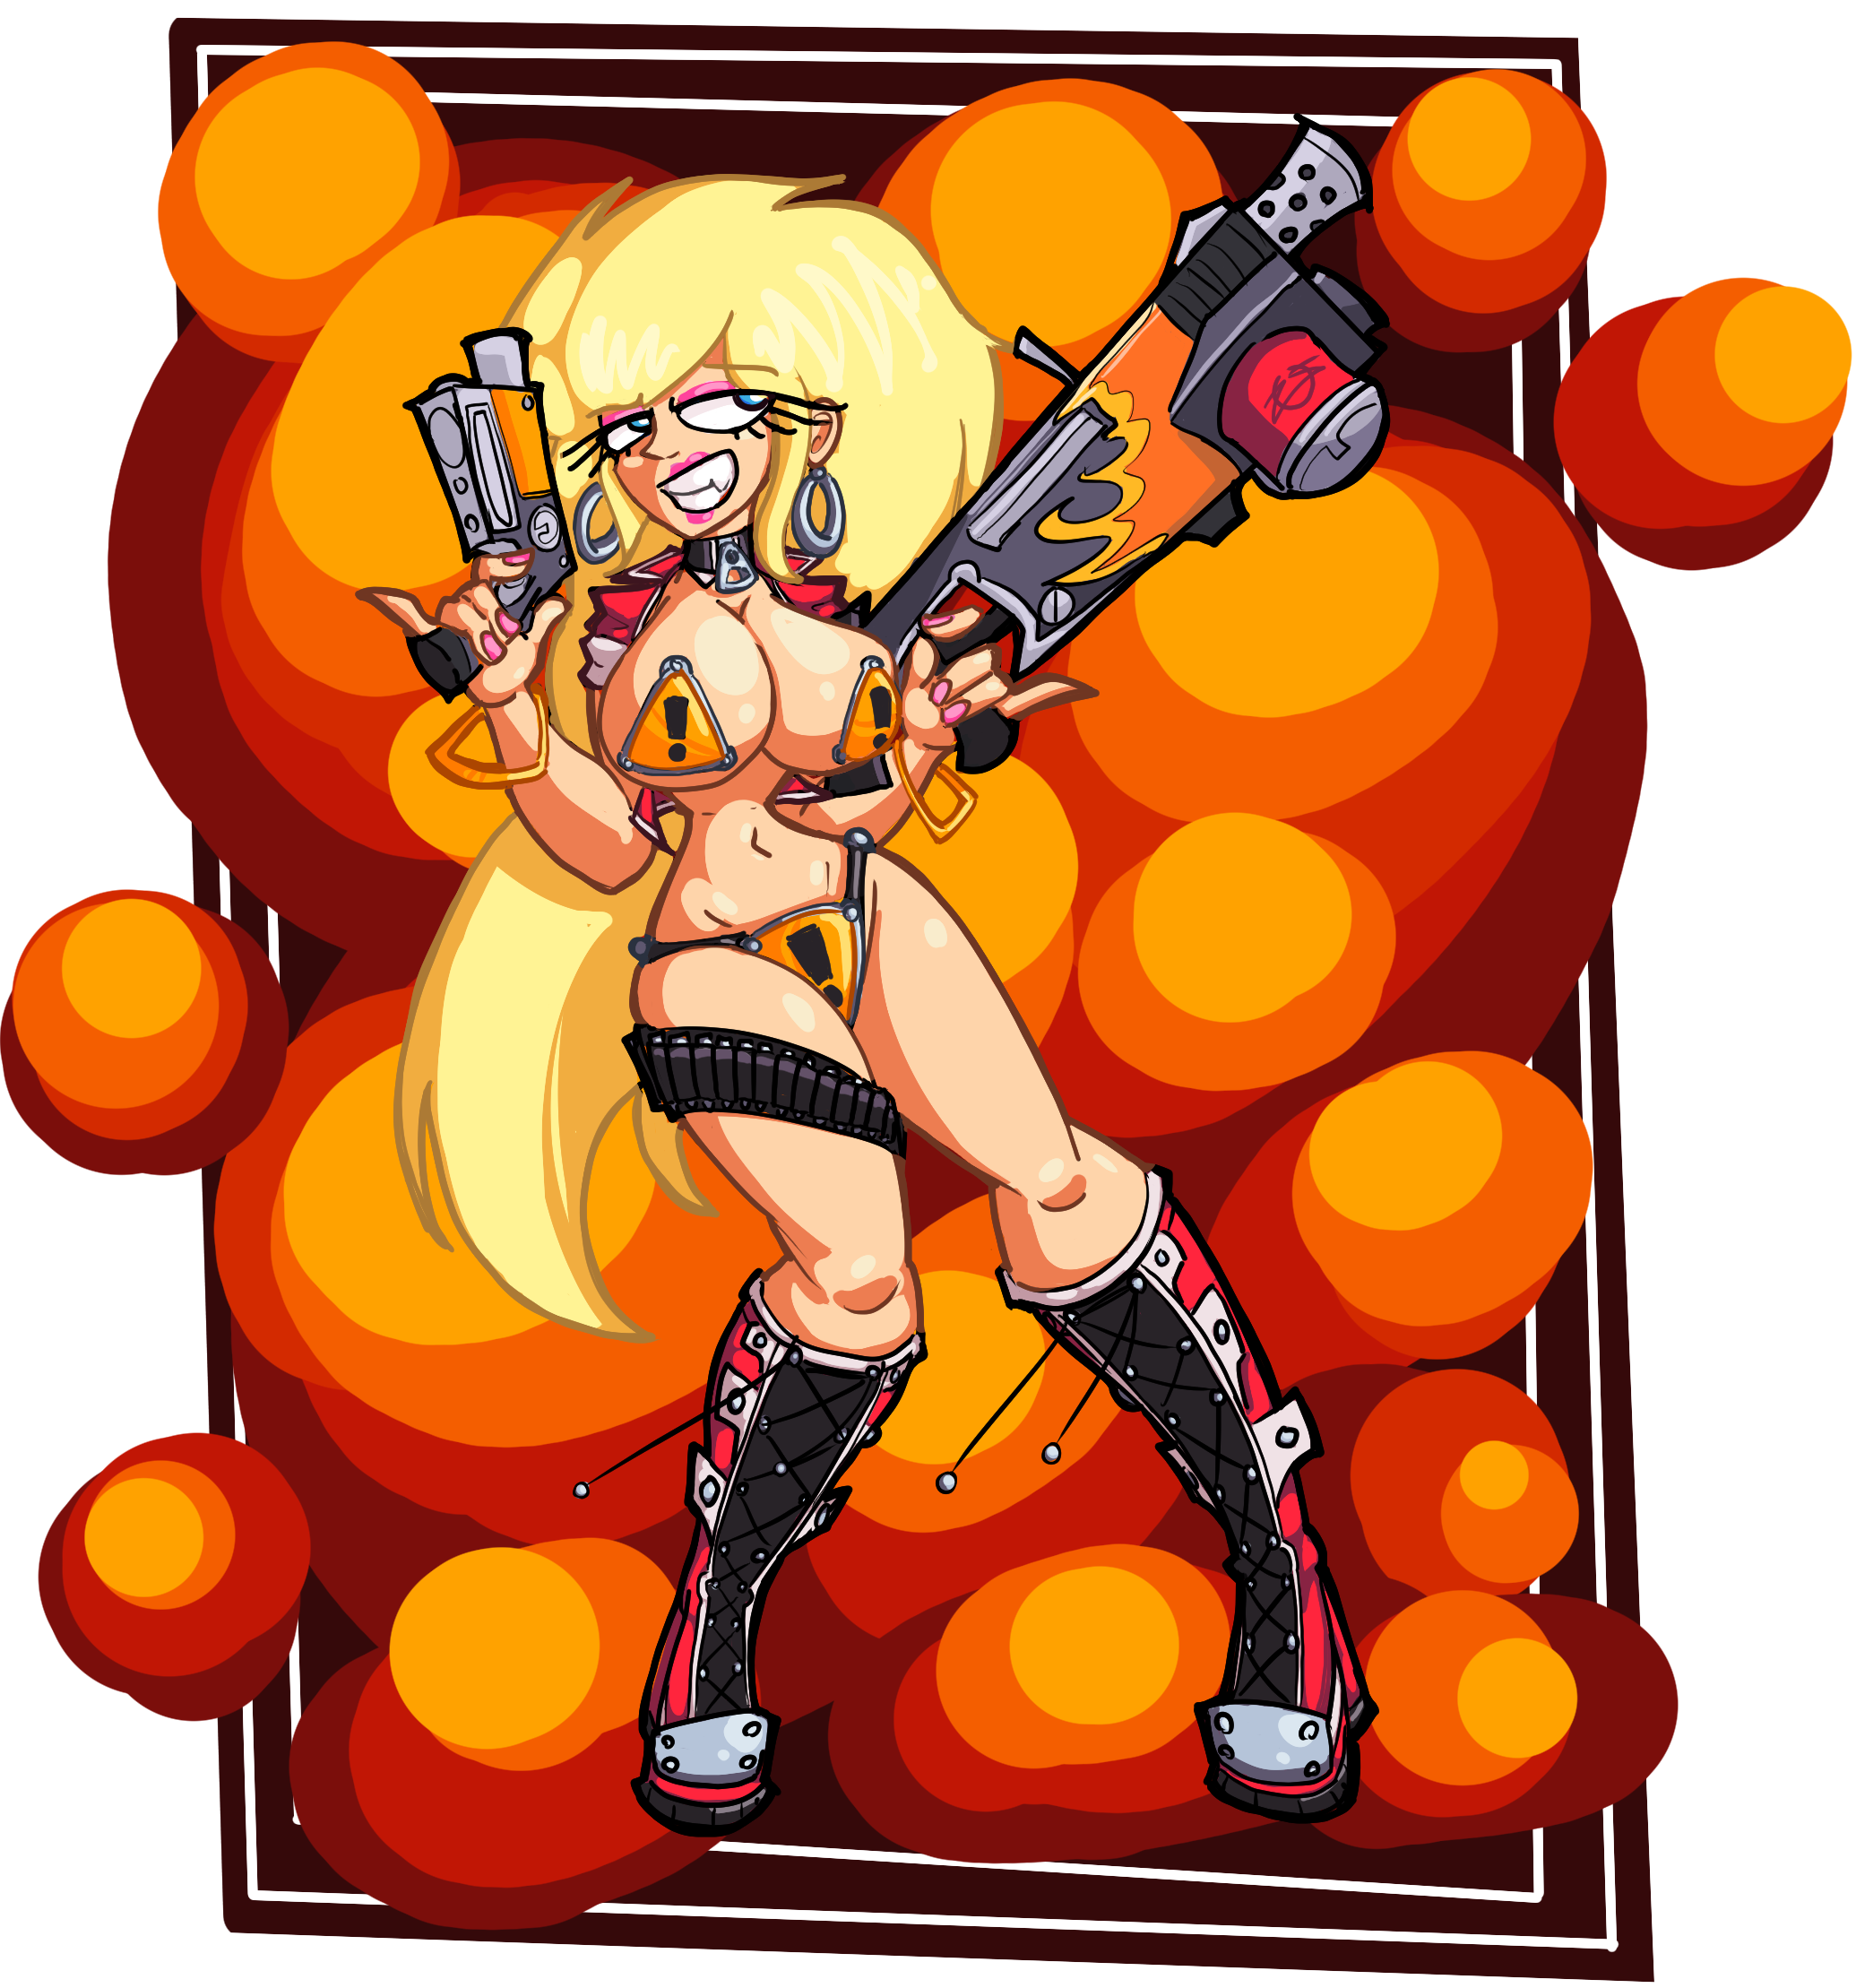 Dolly Danger! A Duke Nukem pastiche from a BEaddventure branch I liked a lot.